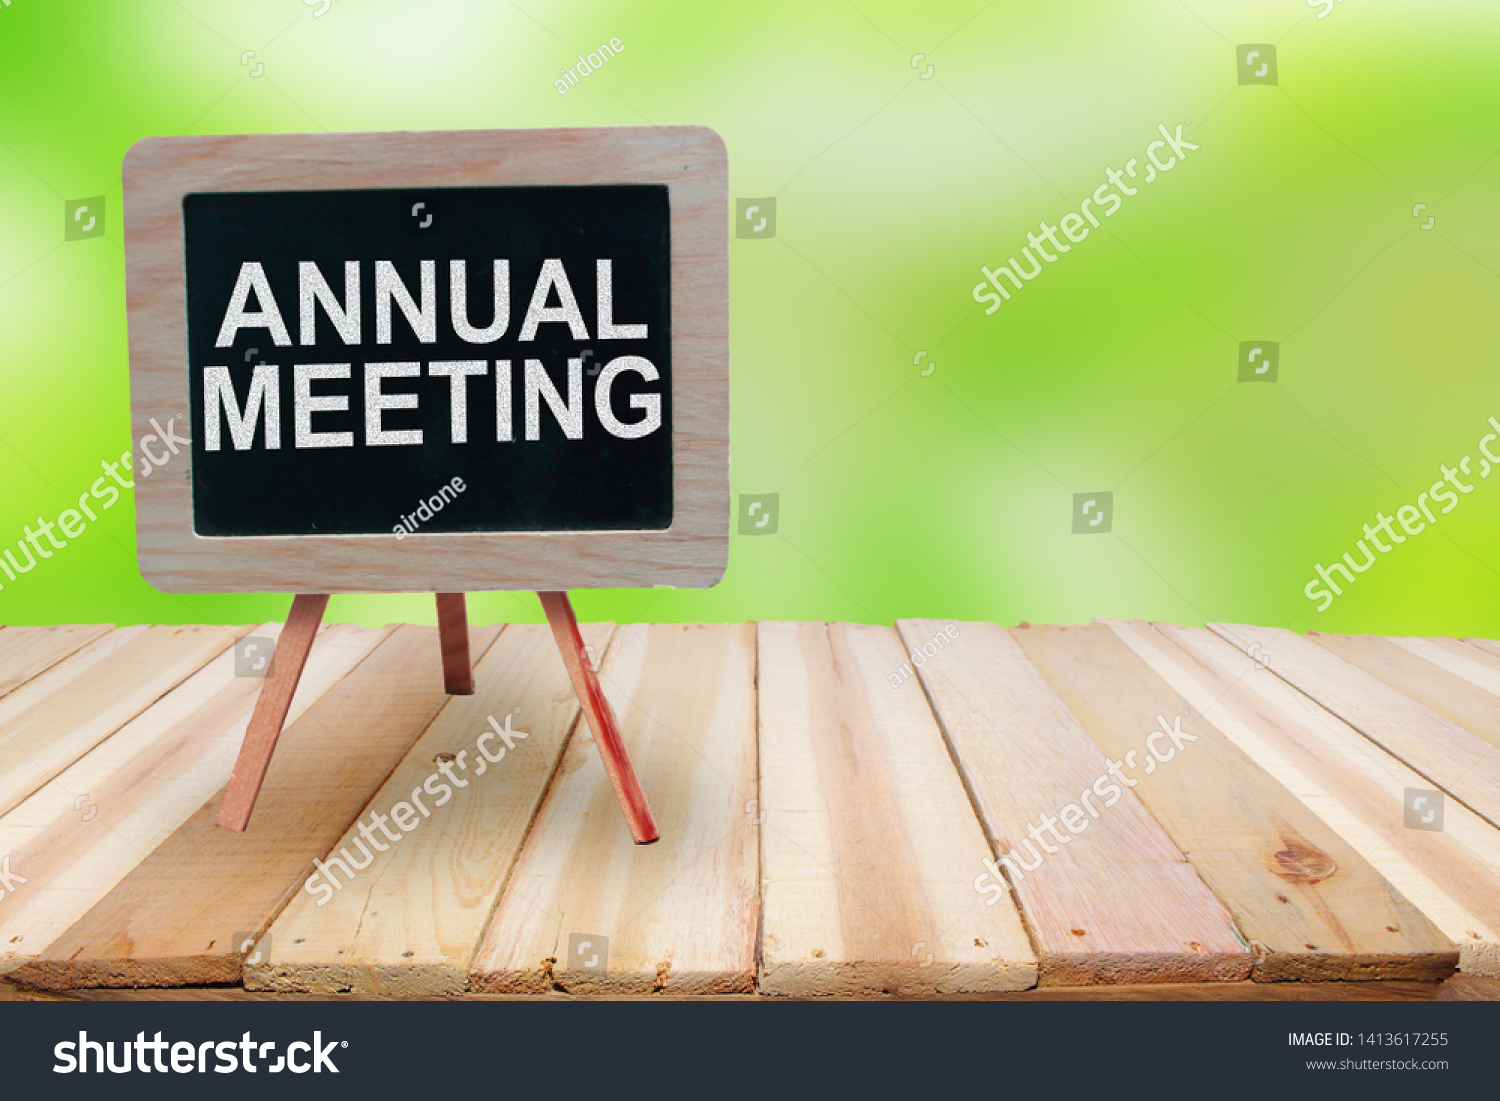 Annual Meeting. Motivational inspirational business marketing words quotes lettering typography concept #1413617255